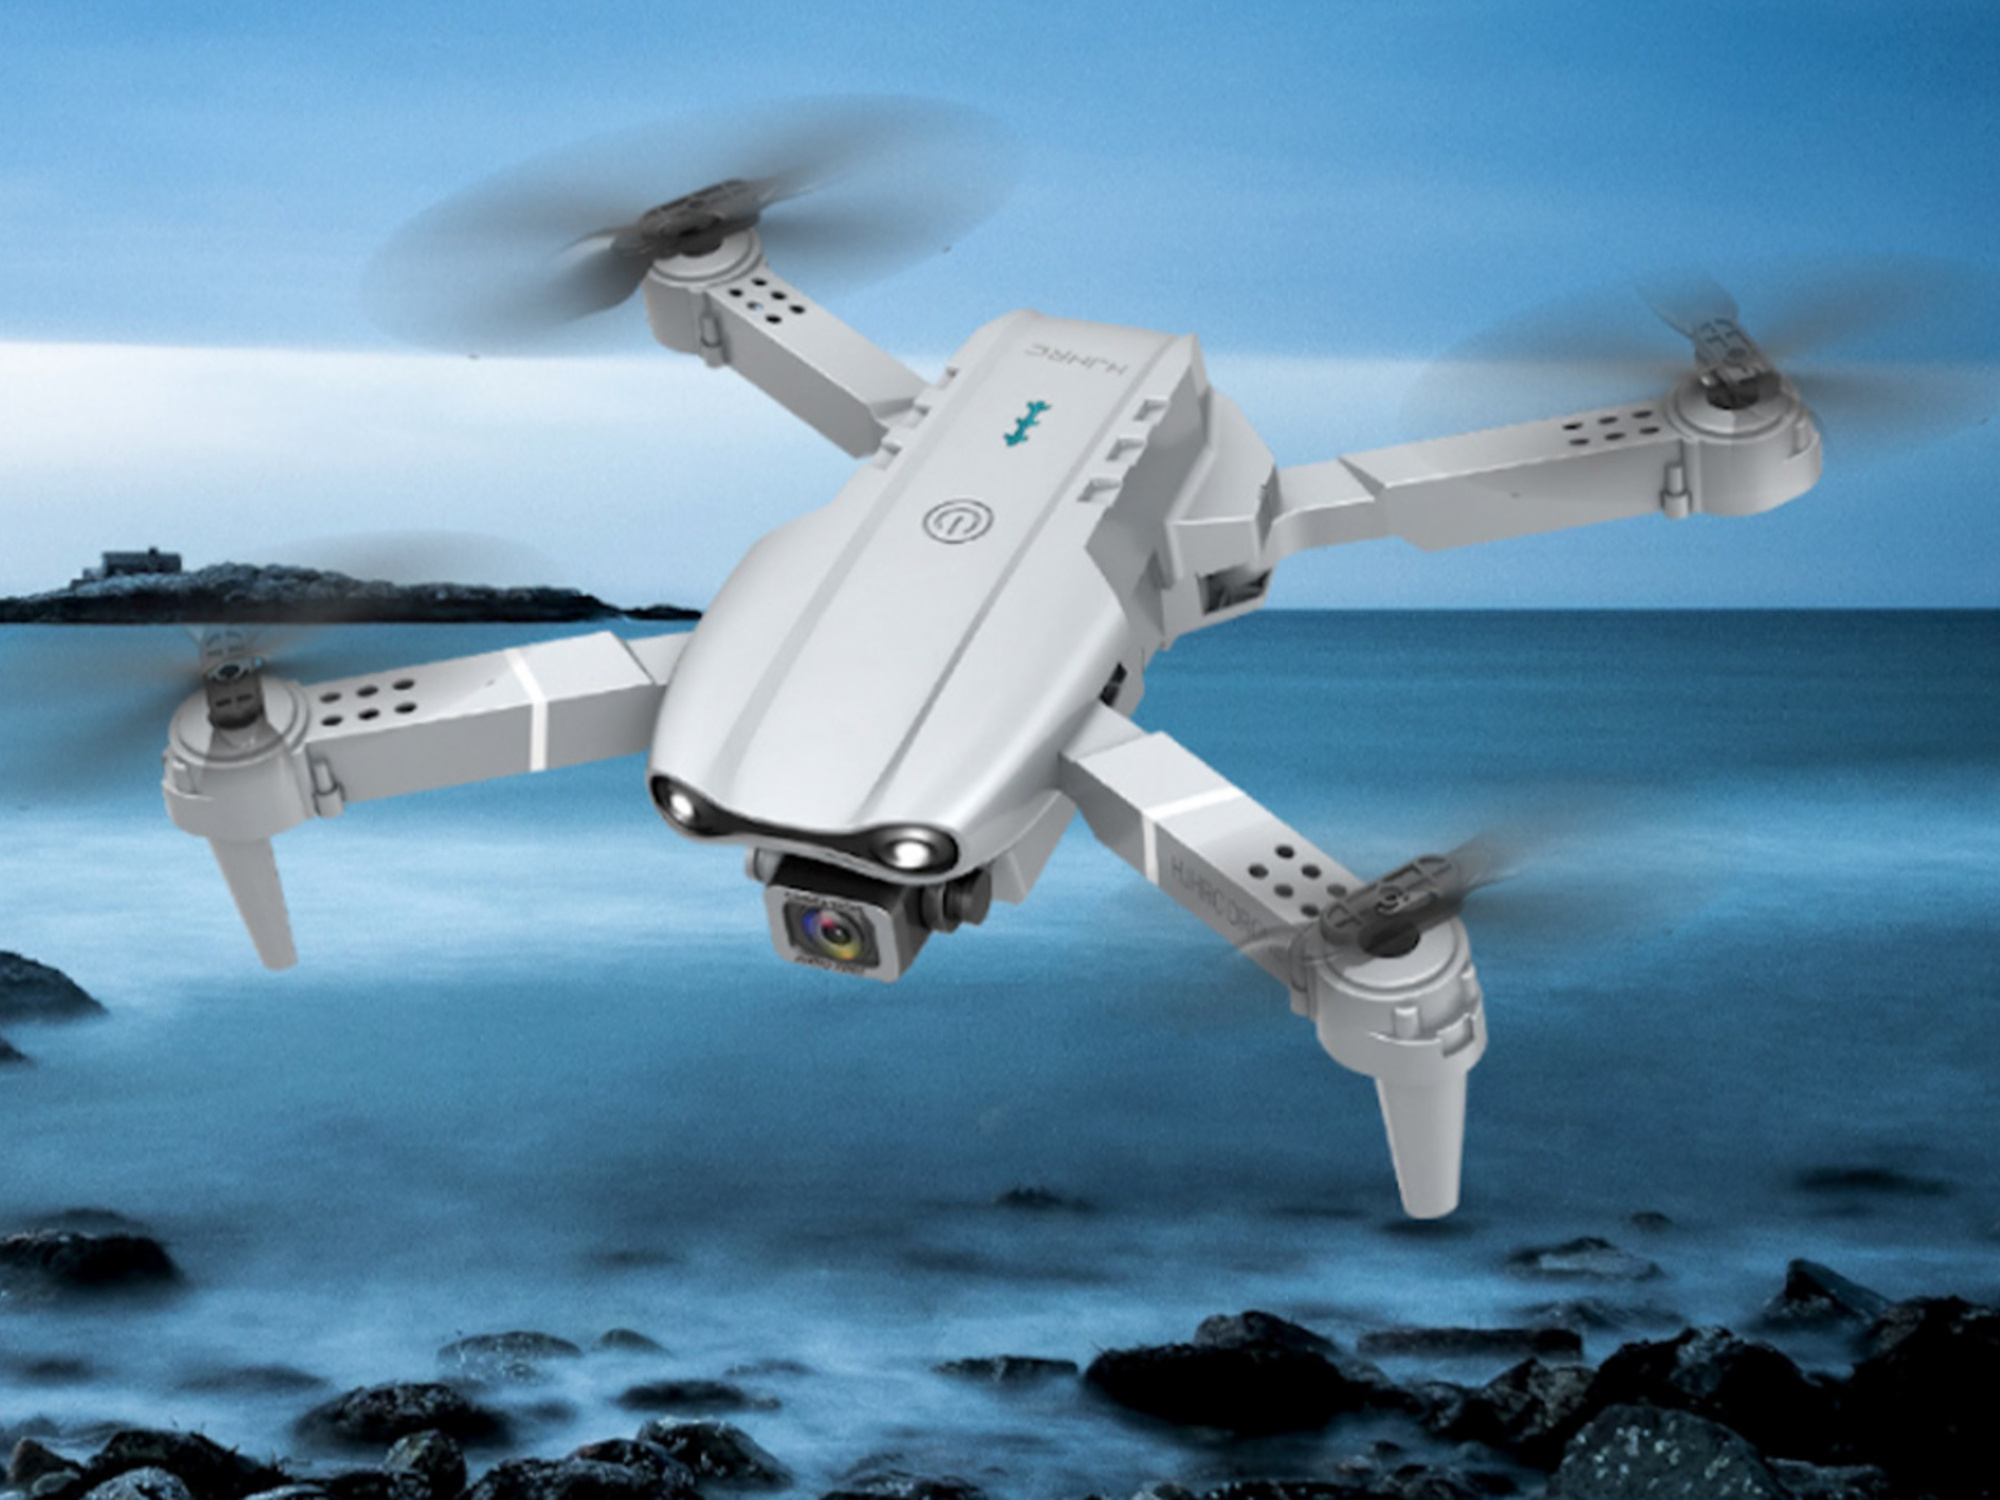 Bundle these 4K drones for only $110 during this early Black Friday price drop